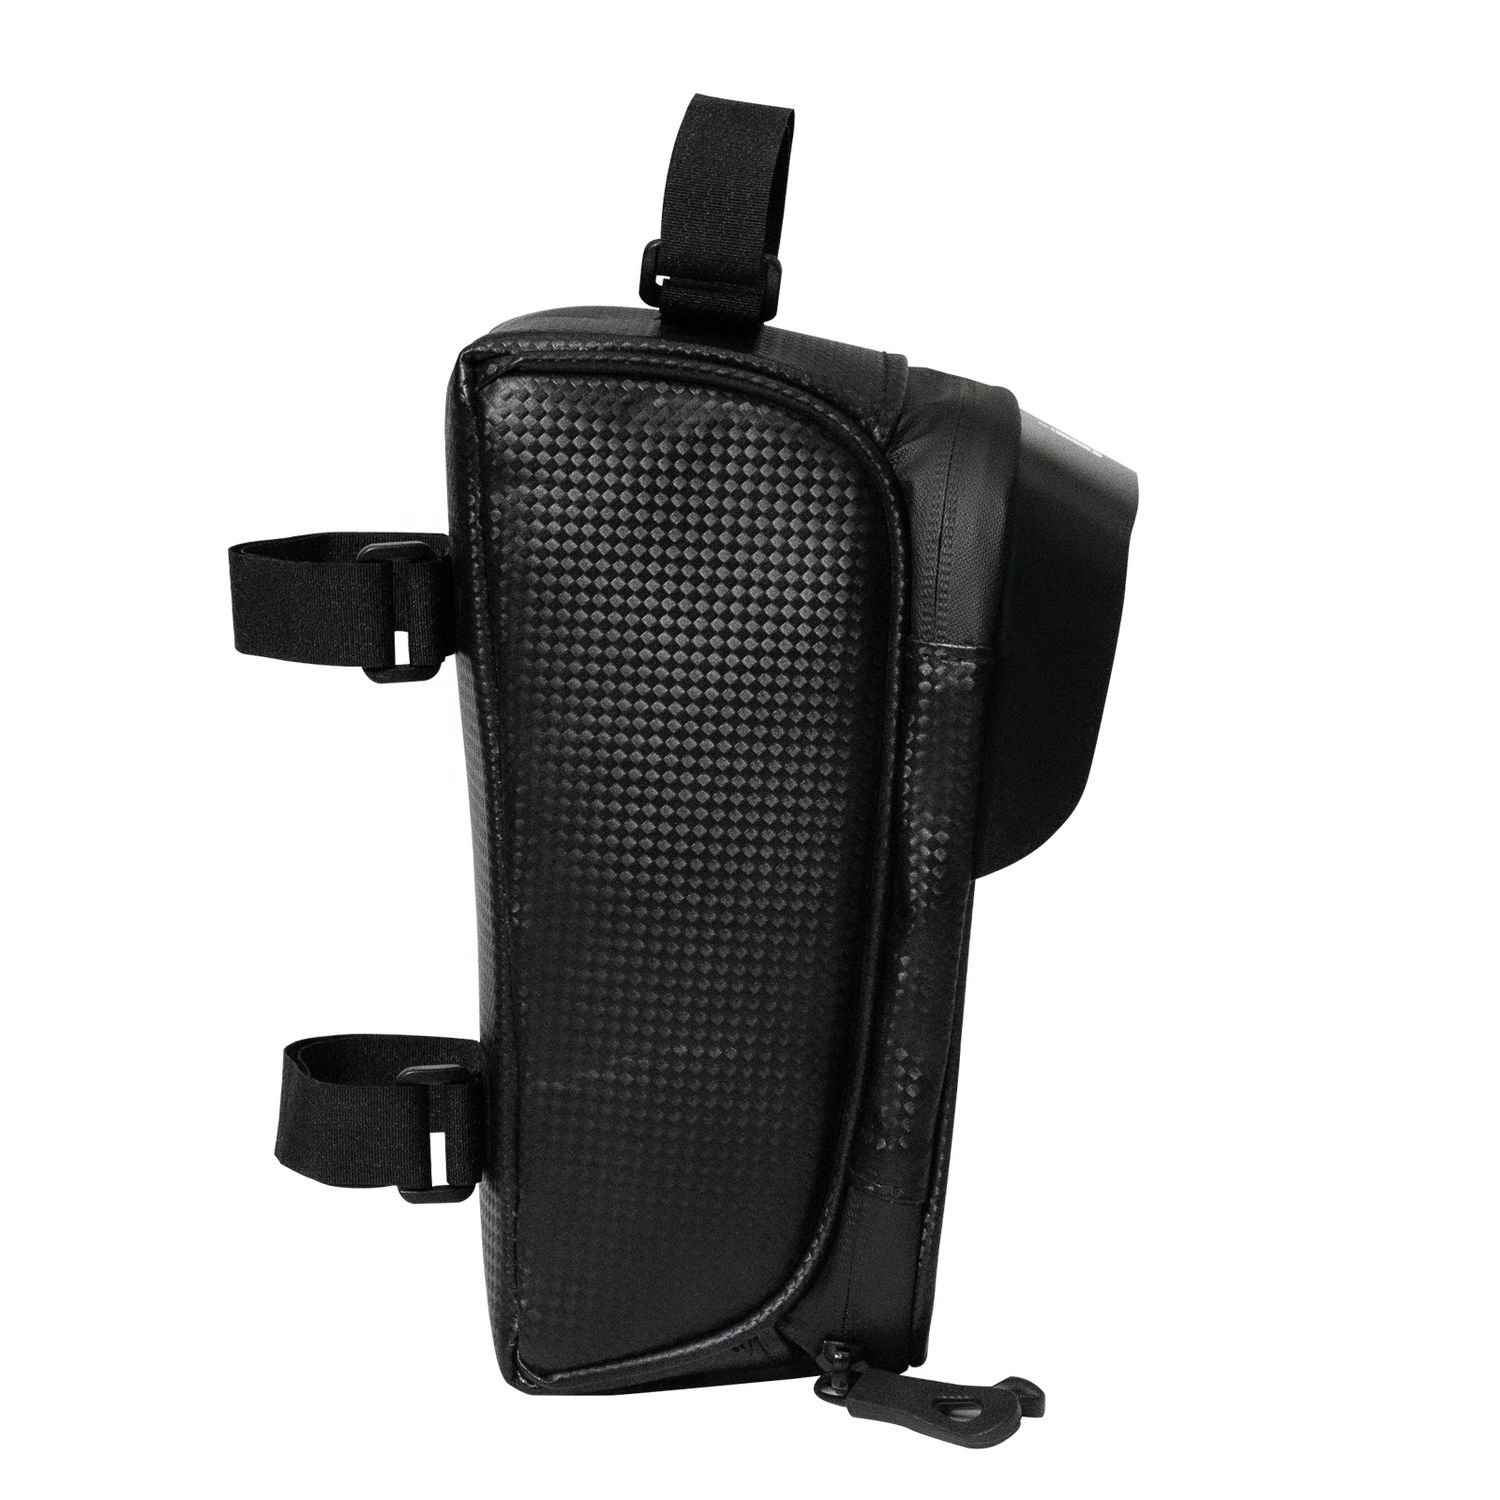 show of our Bike Phone Mount Bag Front Frame Handlebar Waterproof First Aid Kit